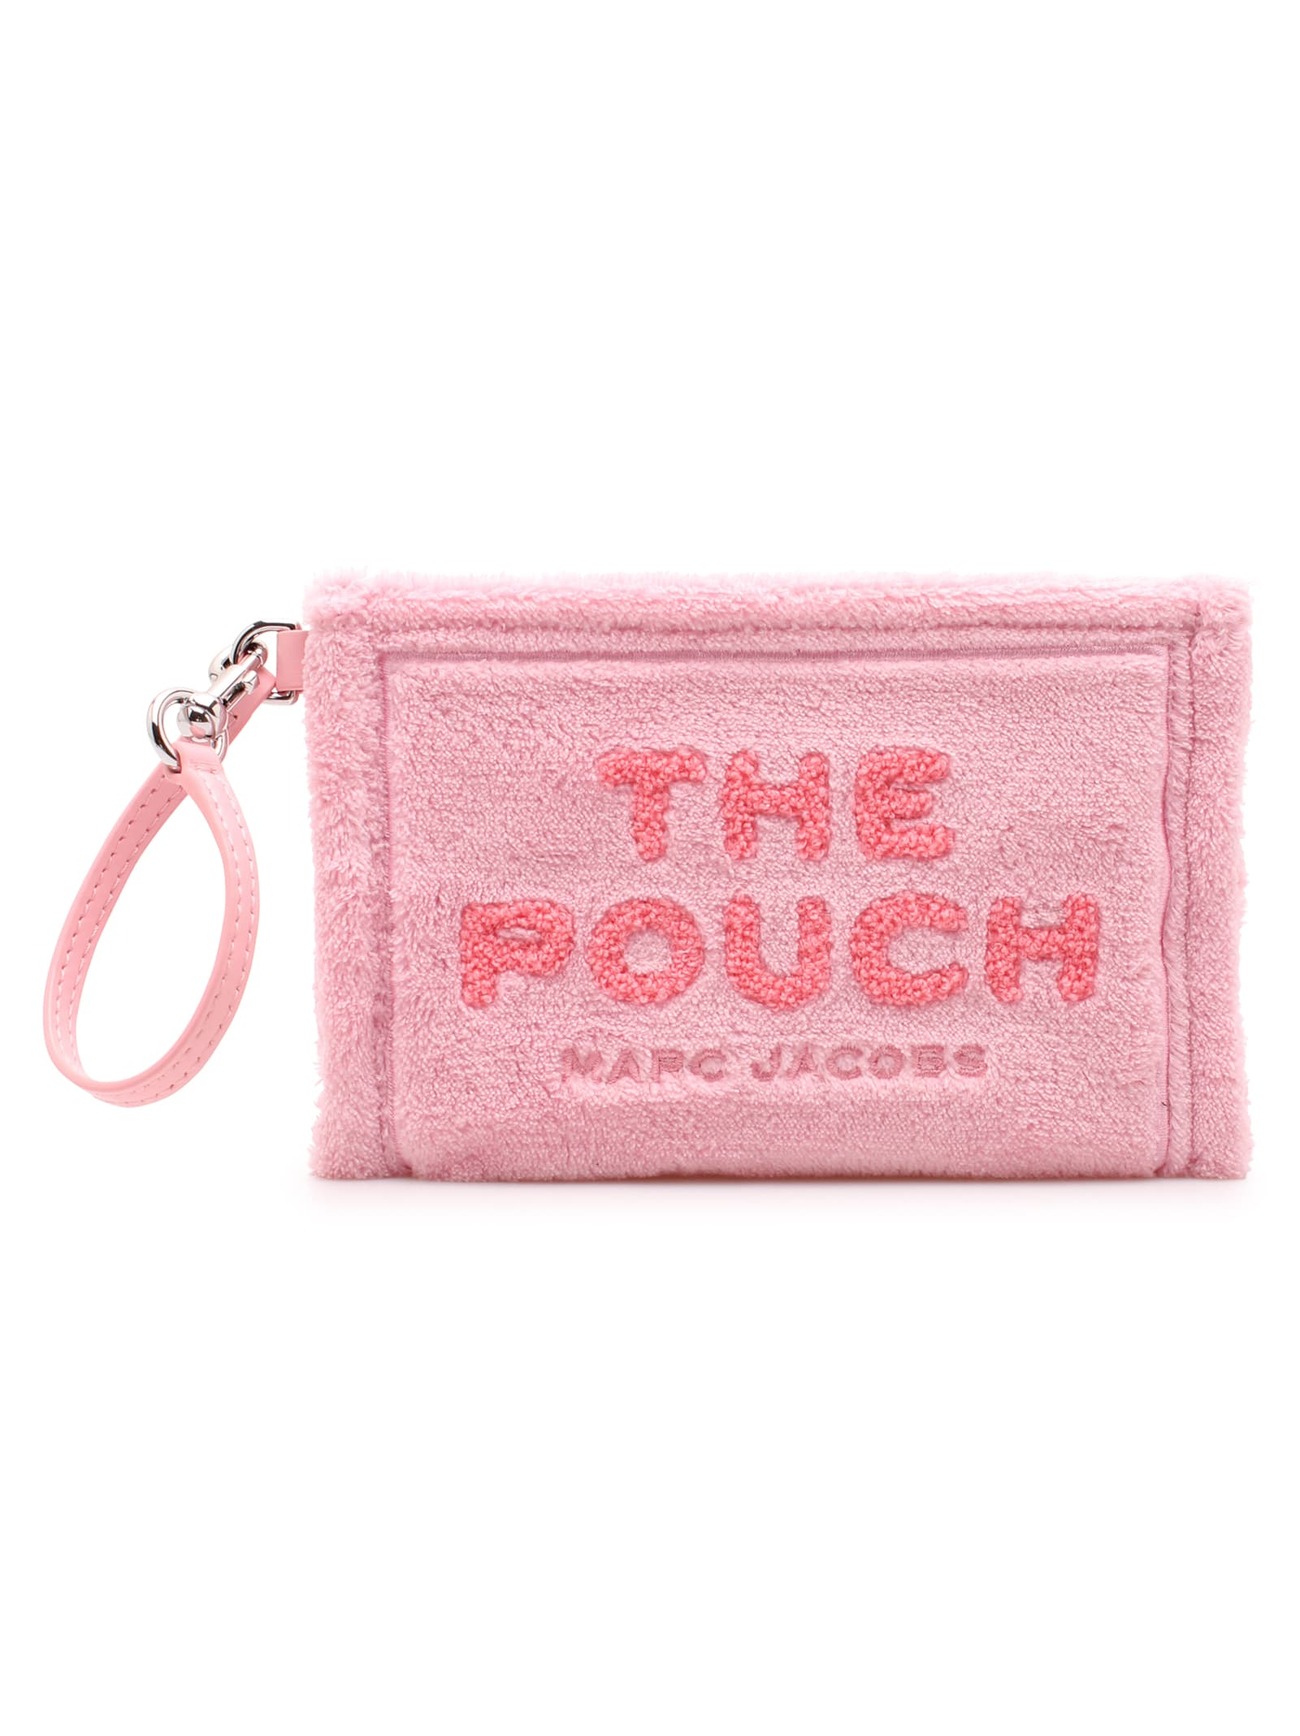 Marc Jacobs the Pouch Clutch Bag in pink